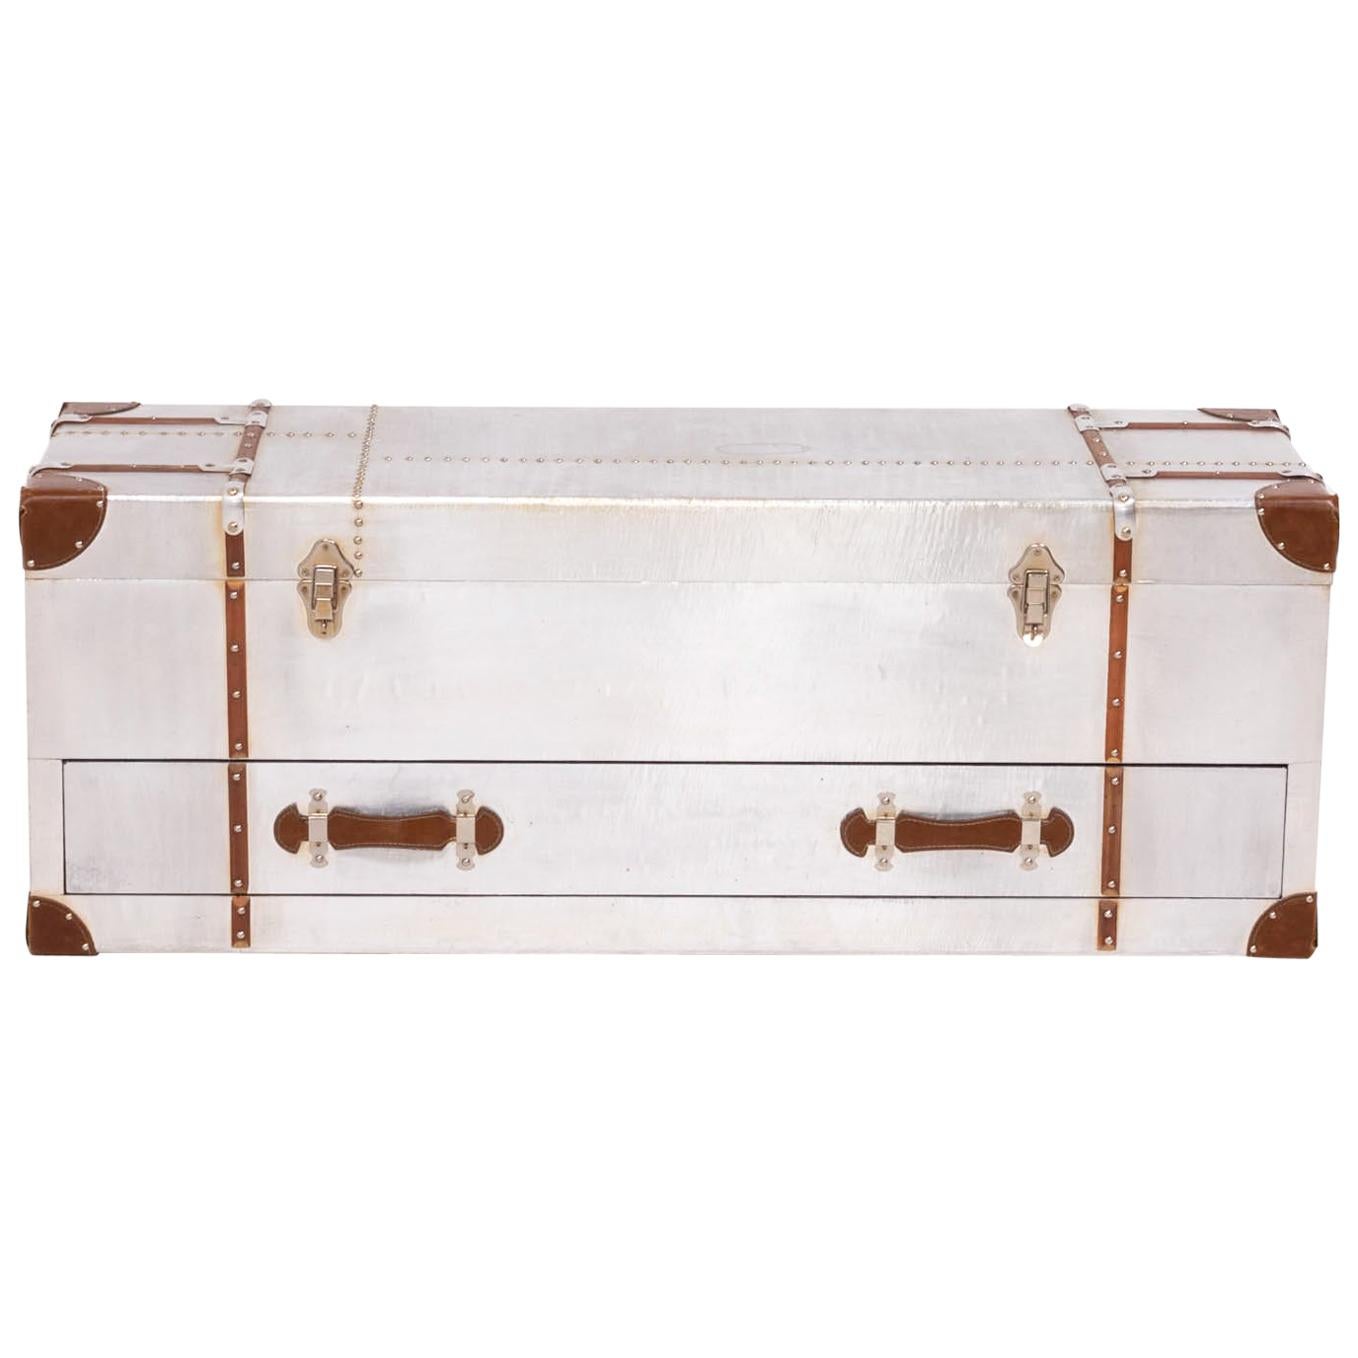 This Industrial style silver storage trunk is constructed from a wood frame and wrapped in aluminium with brass rivet detailing. 
With leather pulls and details this trunk is sure to make a statement in any home. An easy pull out drawer is great to